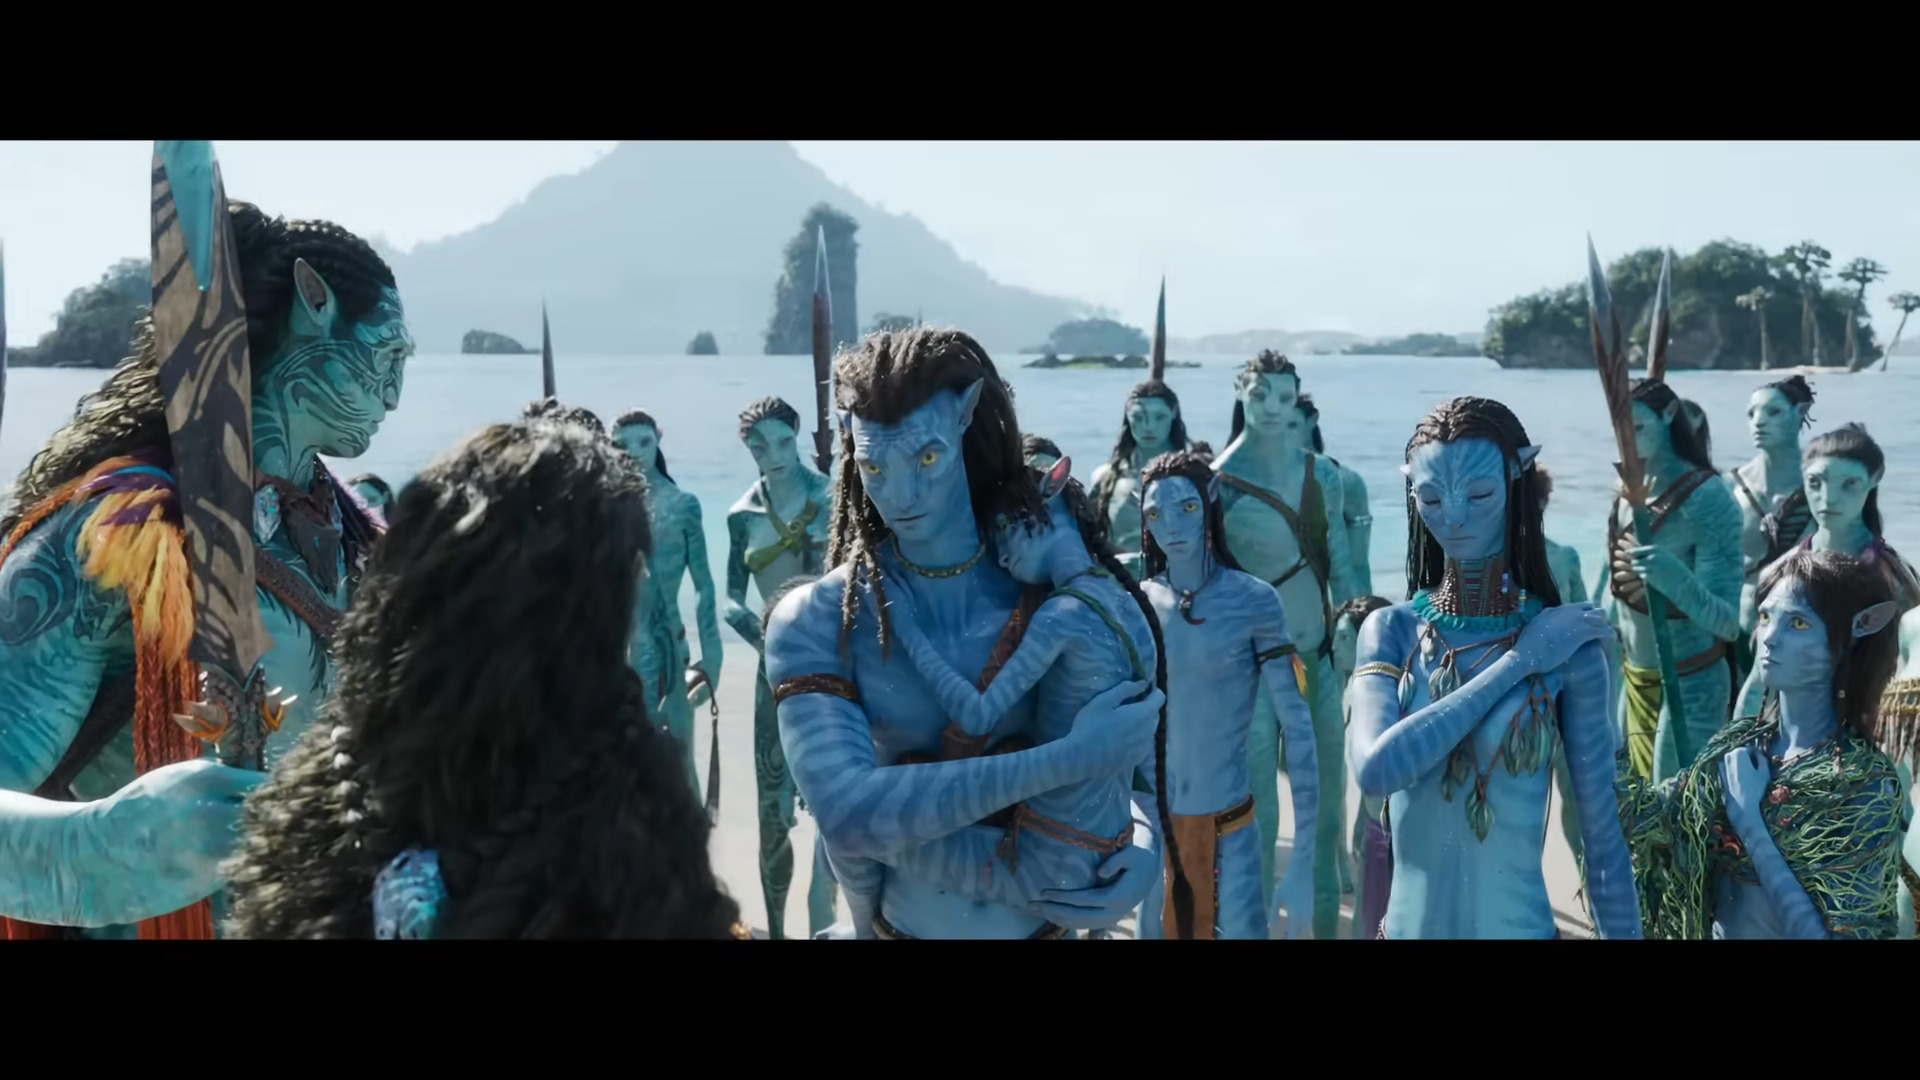 Jake Sully (Sam Worthington) and Neytiri (Zoe Saldaña) introduce themselves and their family to the Metkayina in Avatar: The Way of Water (2022), Disney via YouTube